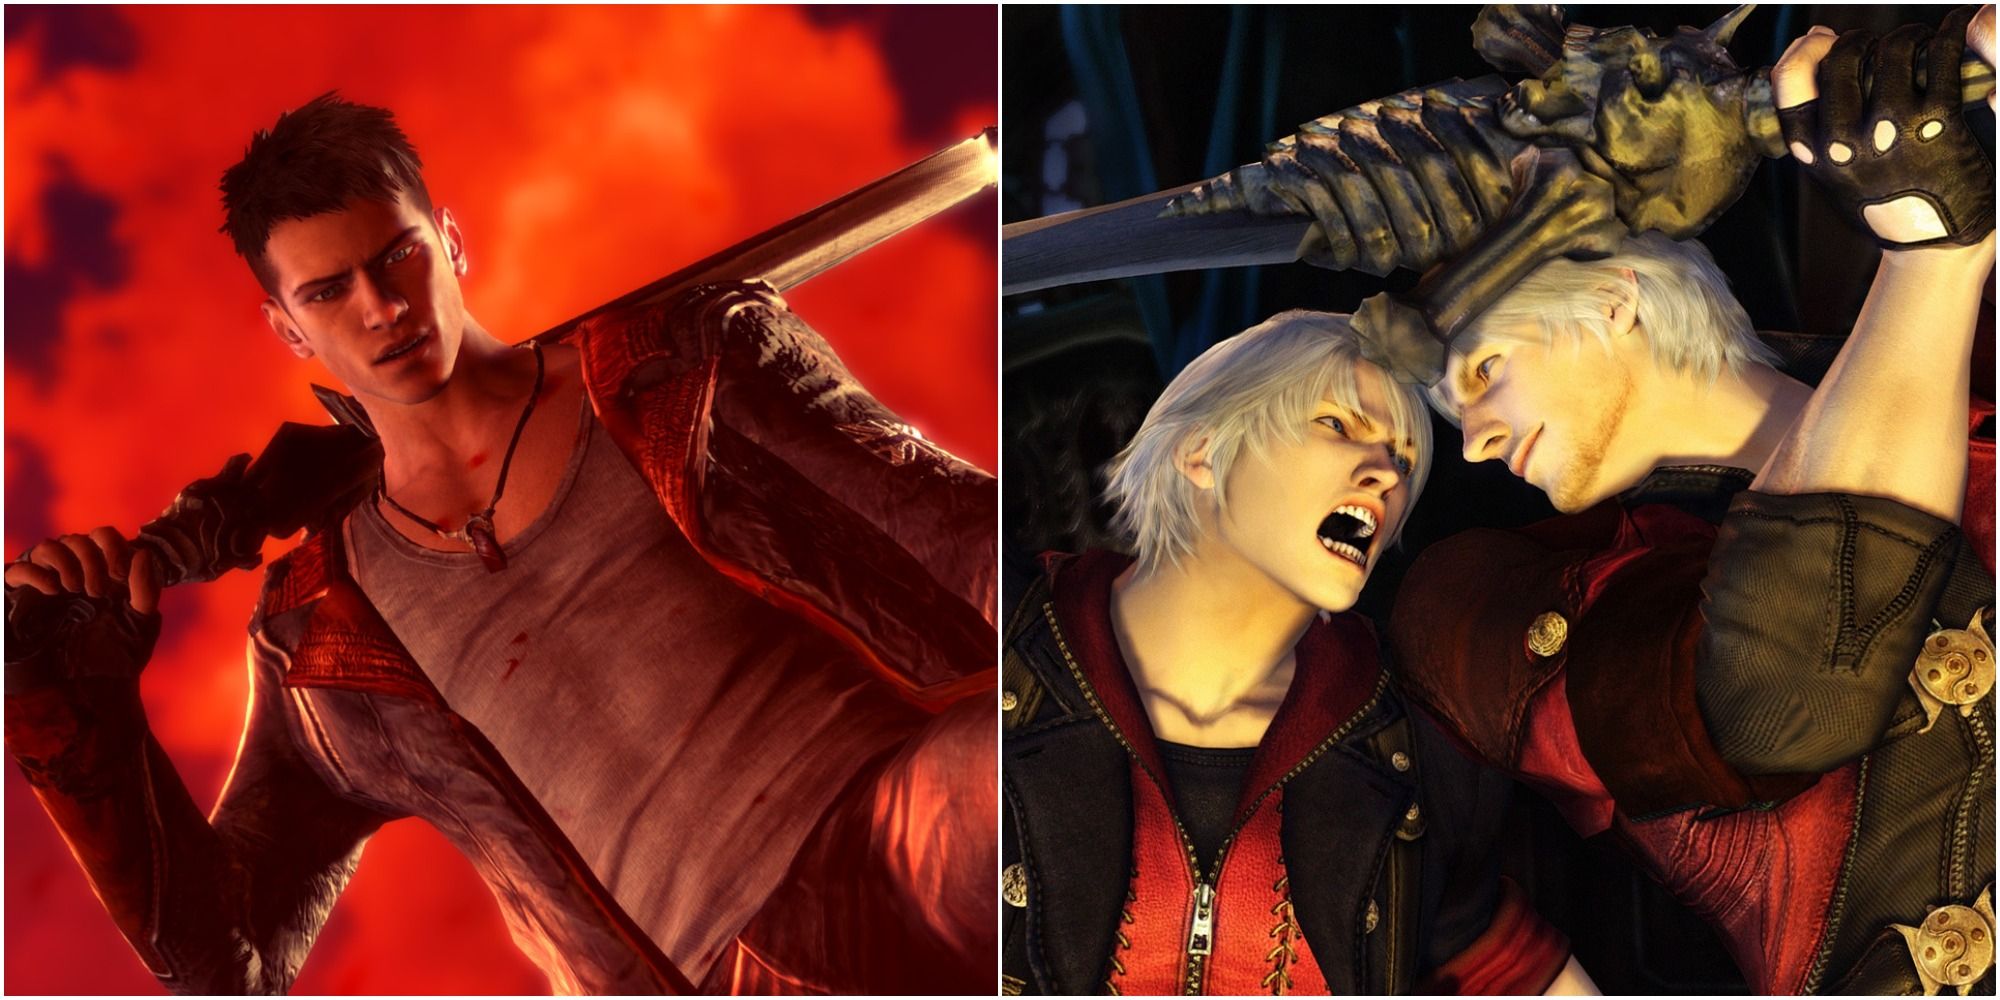 The Original Devil May Cry - The Original Devil May Cry